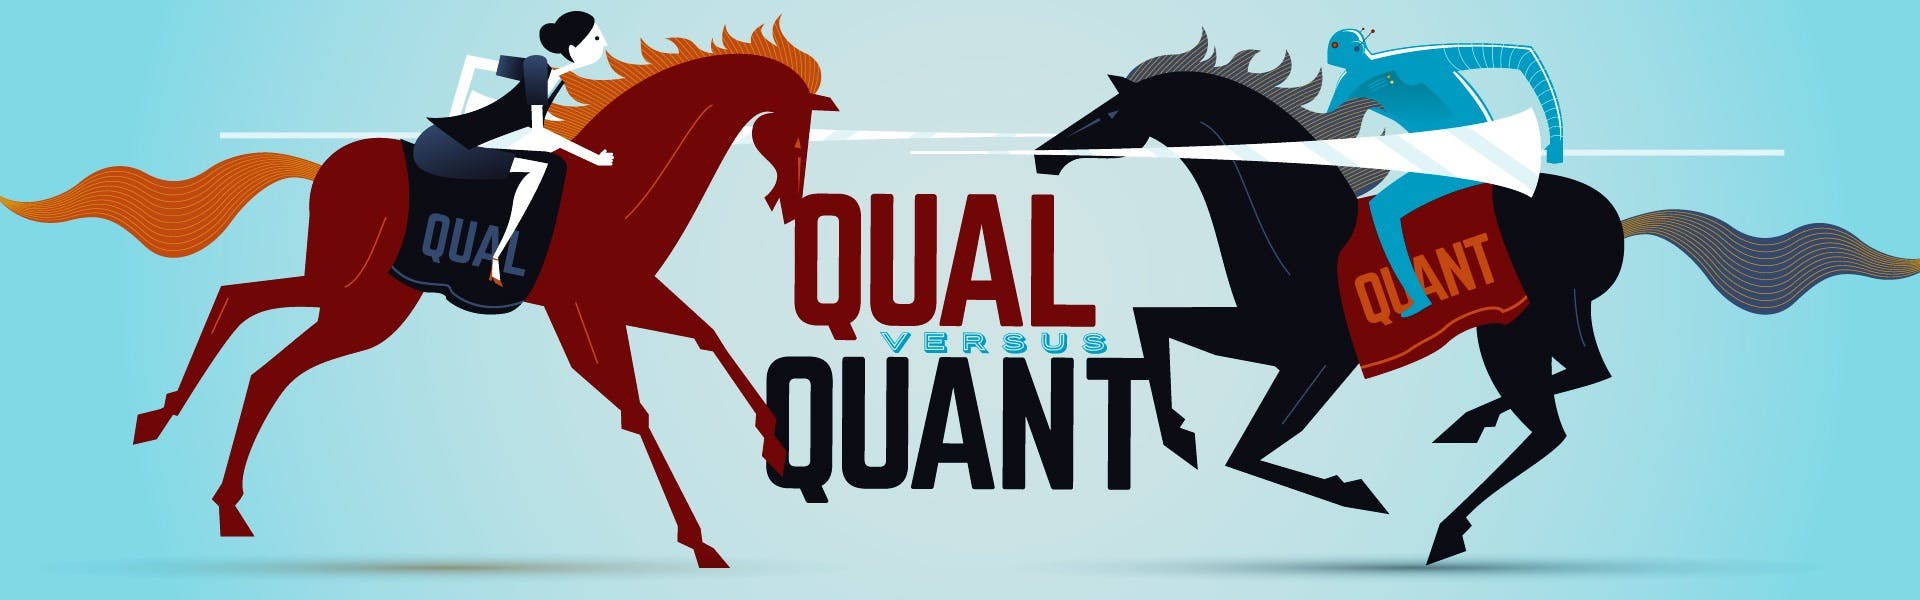 Science: how do you tell the difference between qualitative and quantitative data?